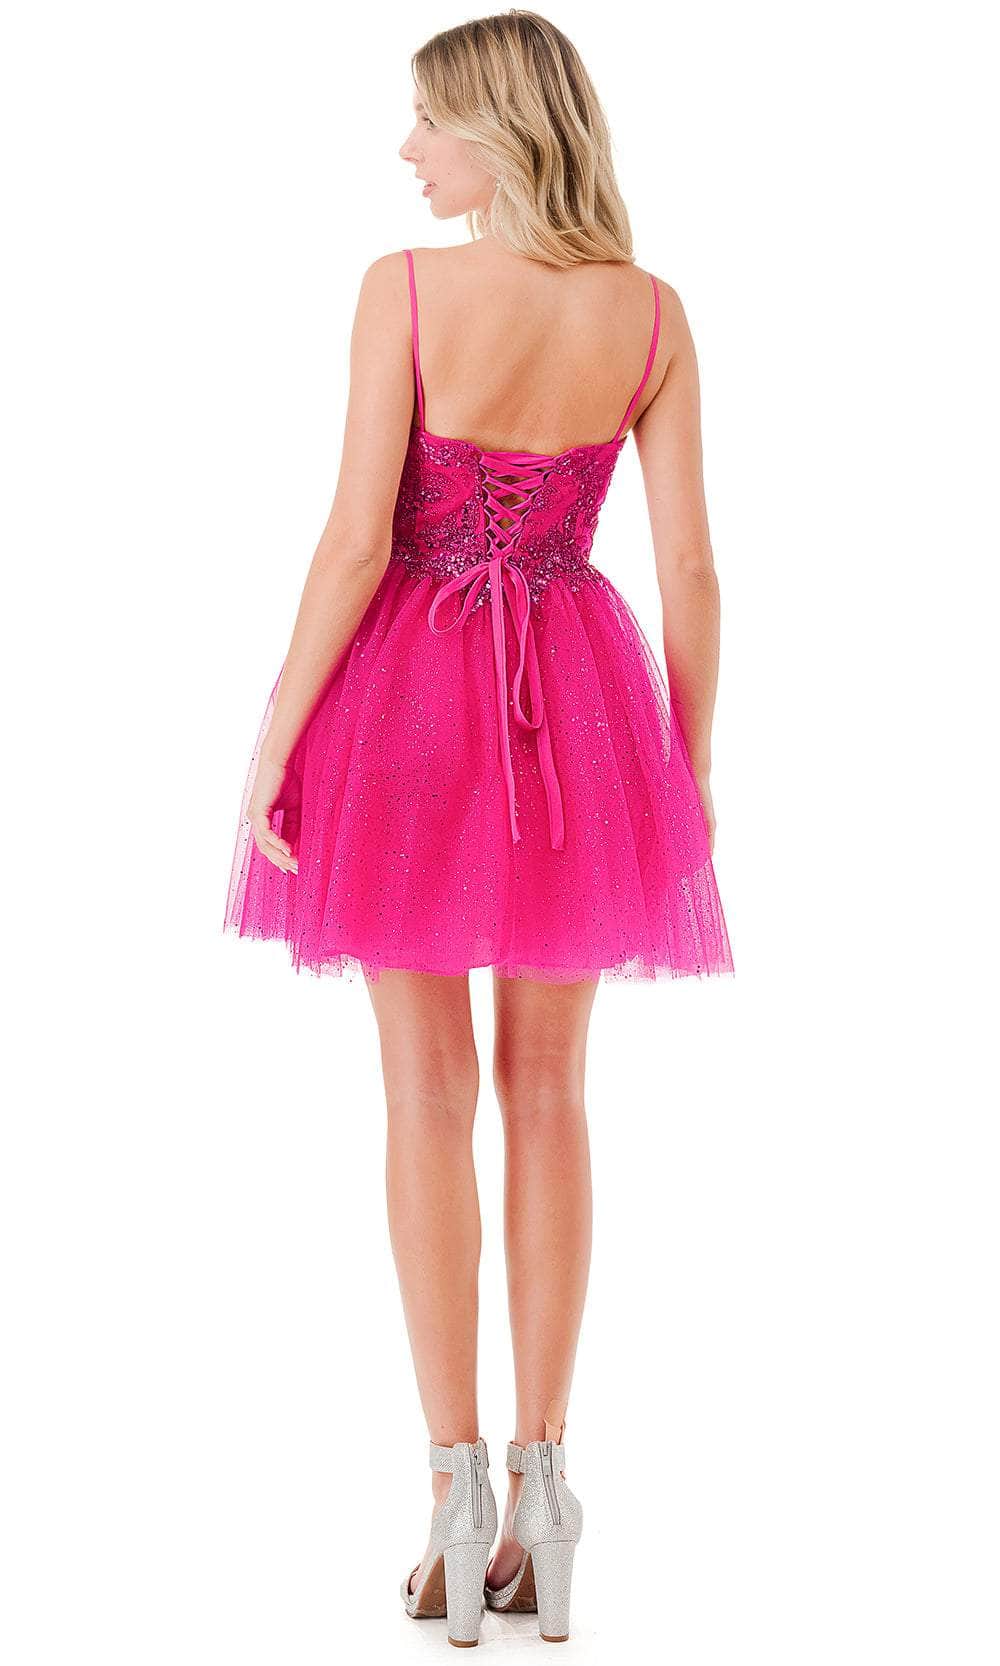 Butterfly Sparkly Short Dress